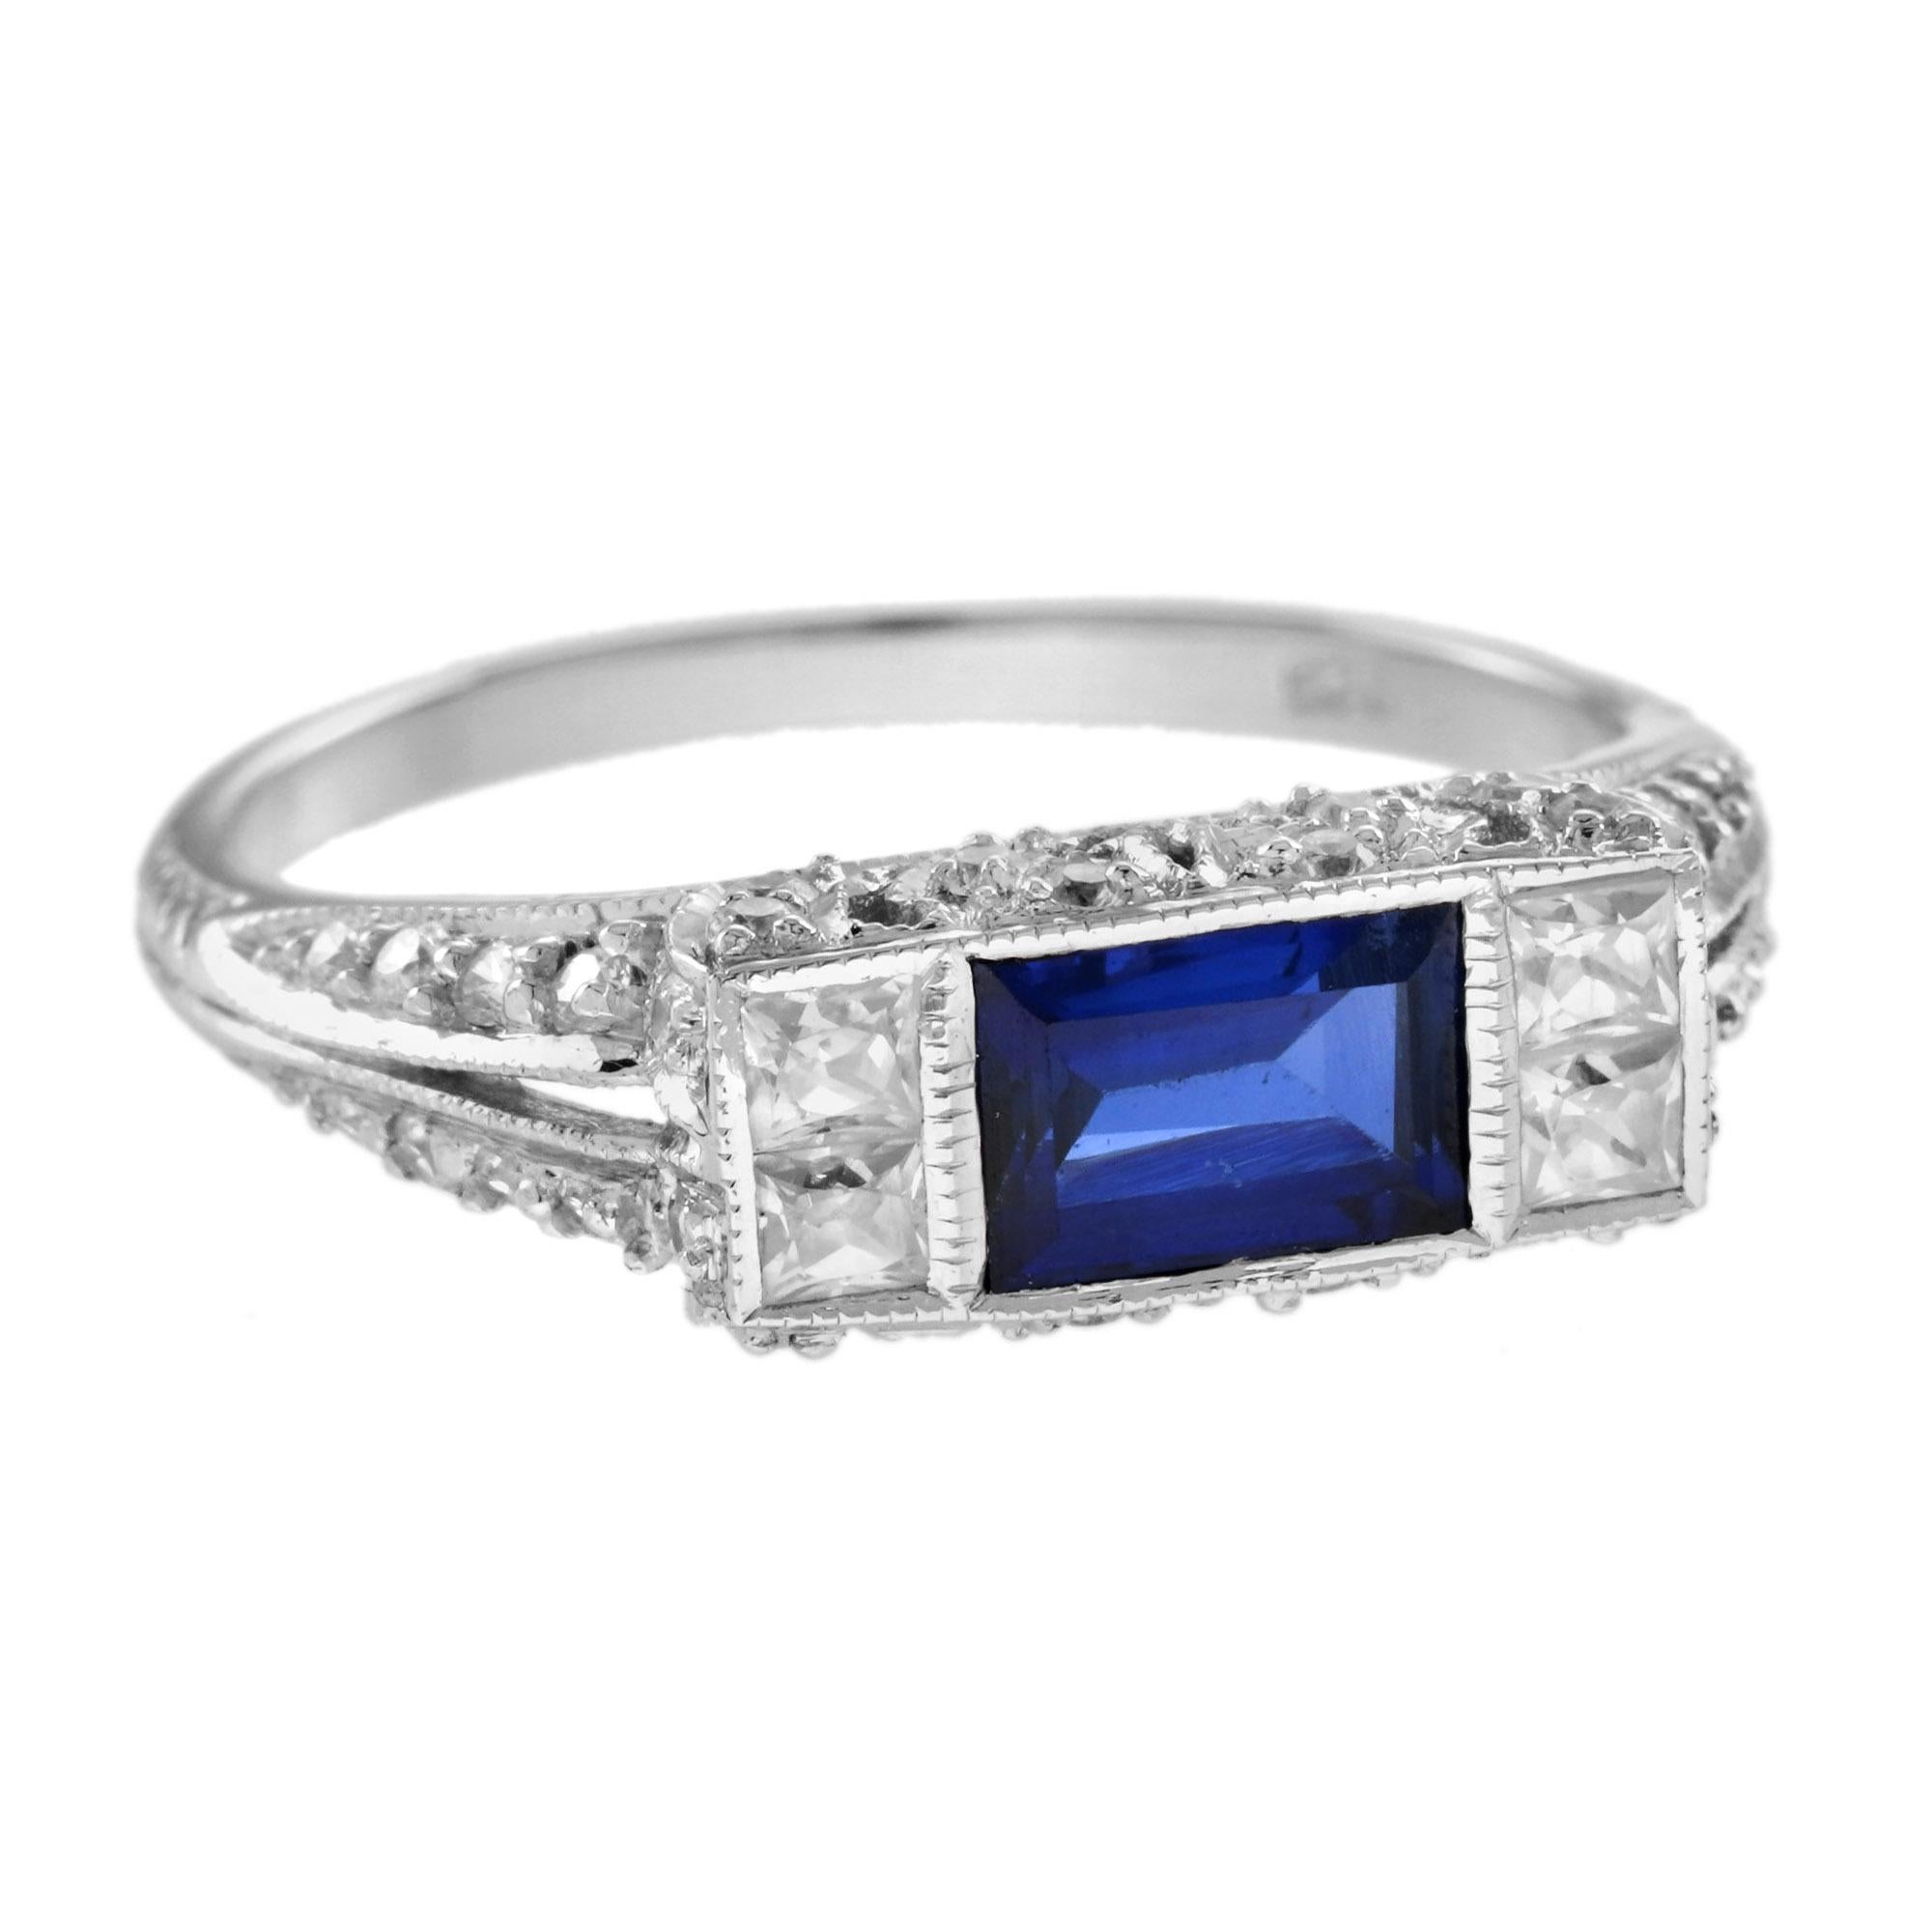 For Sale:  Blue Sapphire and Diamond Art Deco Style Solitaire Ring in 14K White Gold  3